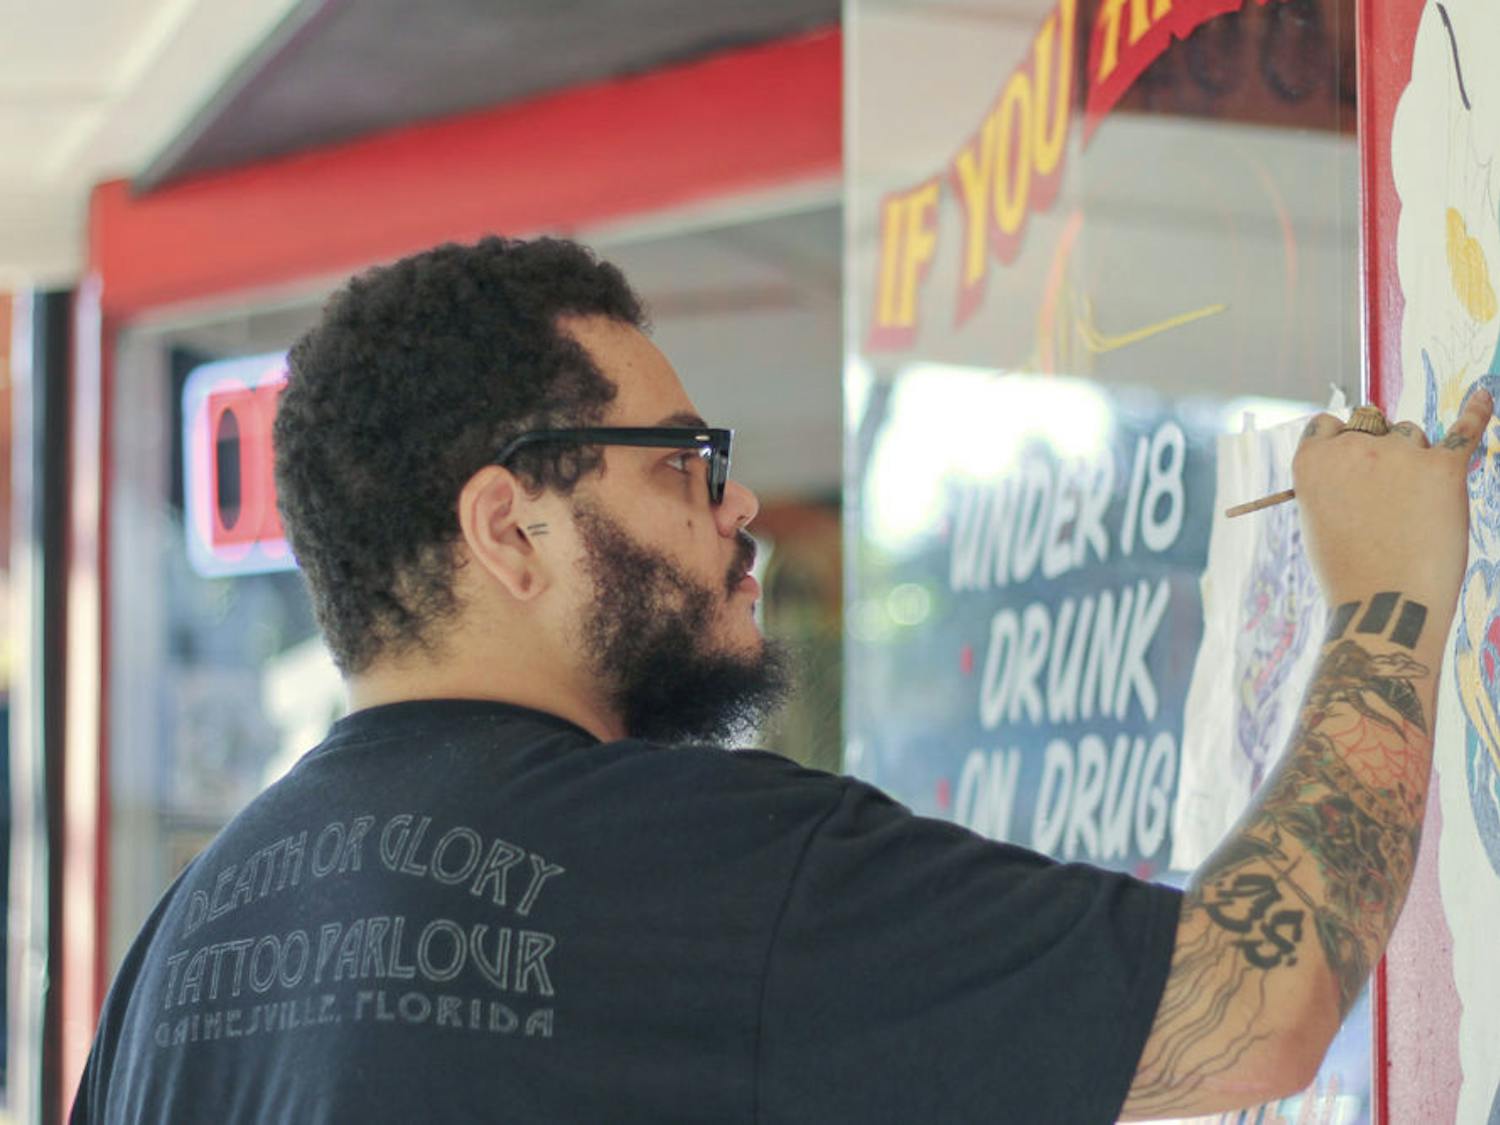 Jesus Lopez, 26, a tattoo artist at Death or Glory Tattoo Parlour, paints a dragon on the face of the shop. The dragon is an old Sailor Jerry design the shop chose to spruce up the building.